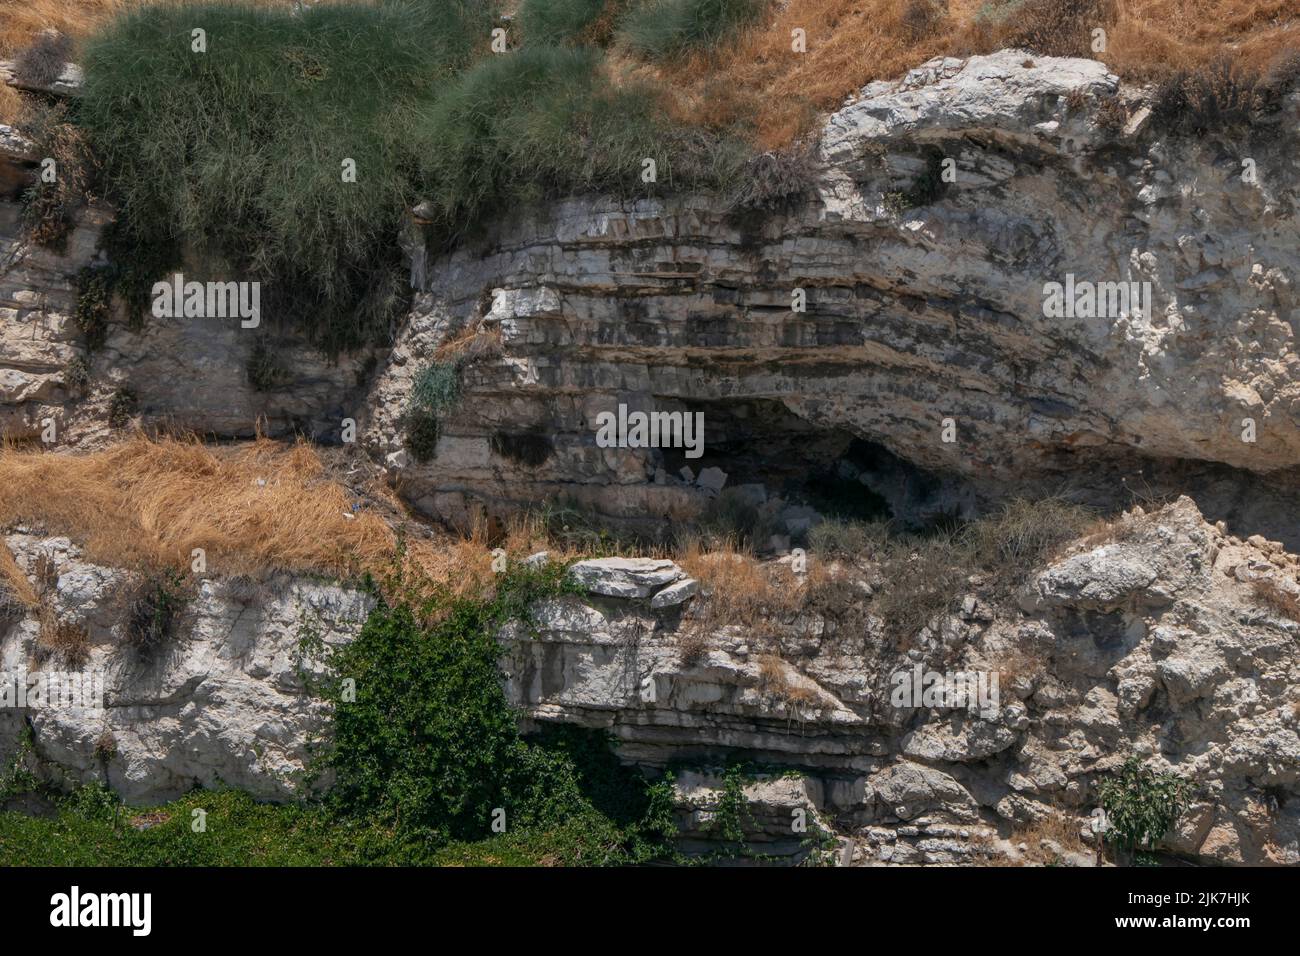 View of a rocky escarpment called Golgotha also known as Skull Hill in East Jerusalem Israel Stock Photo